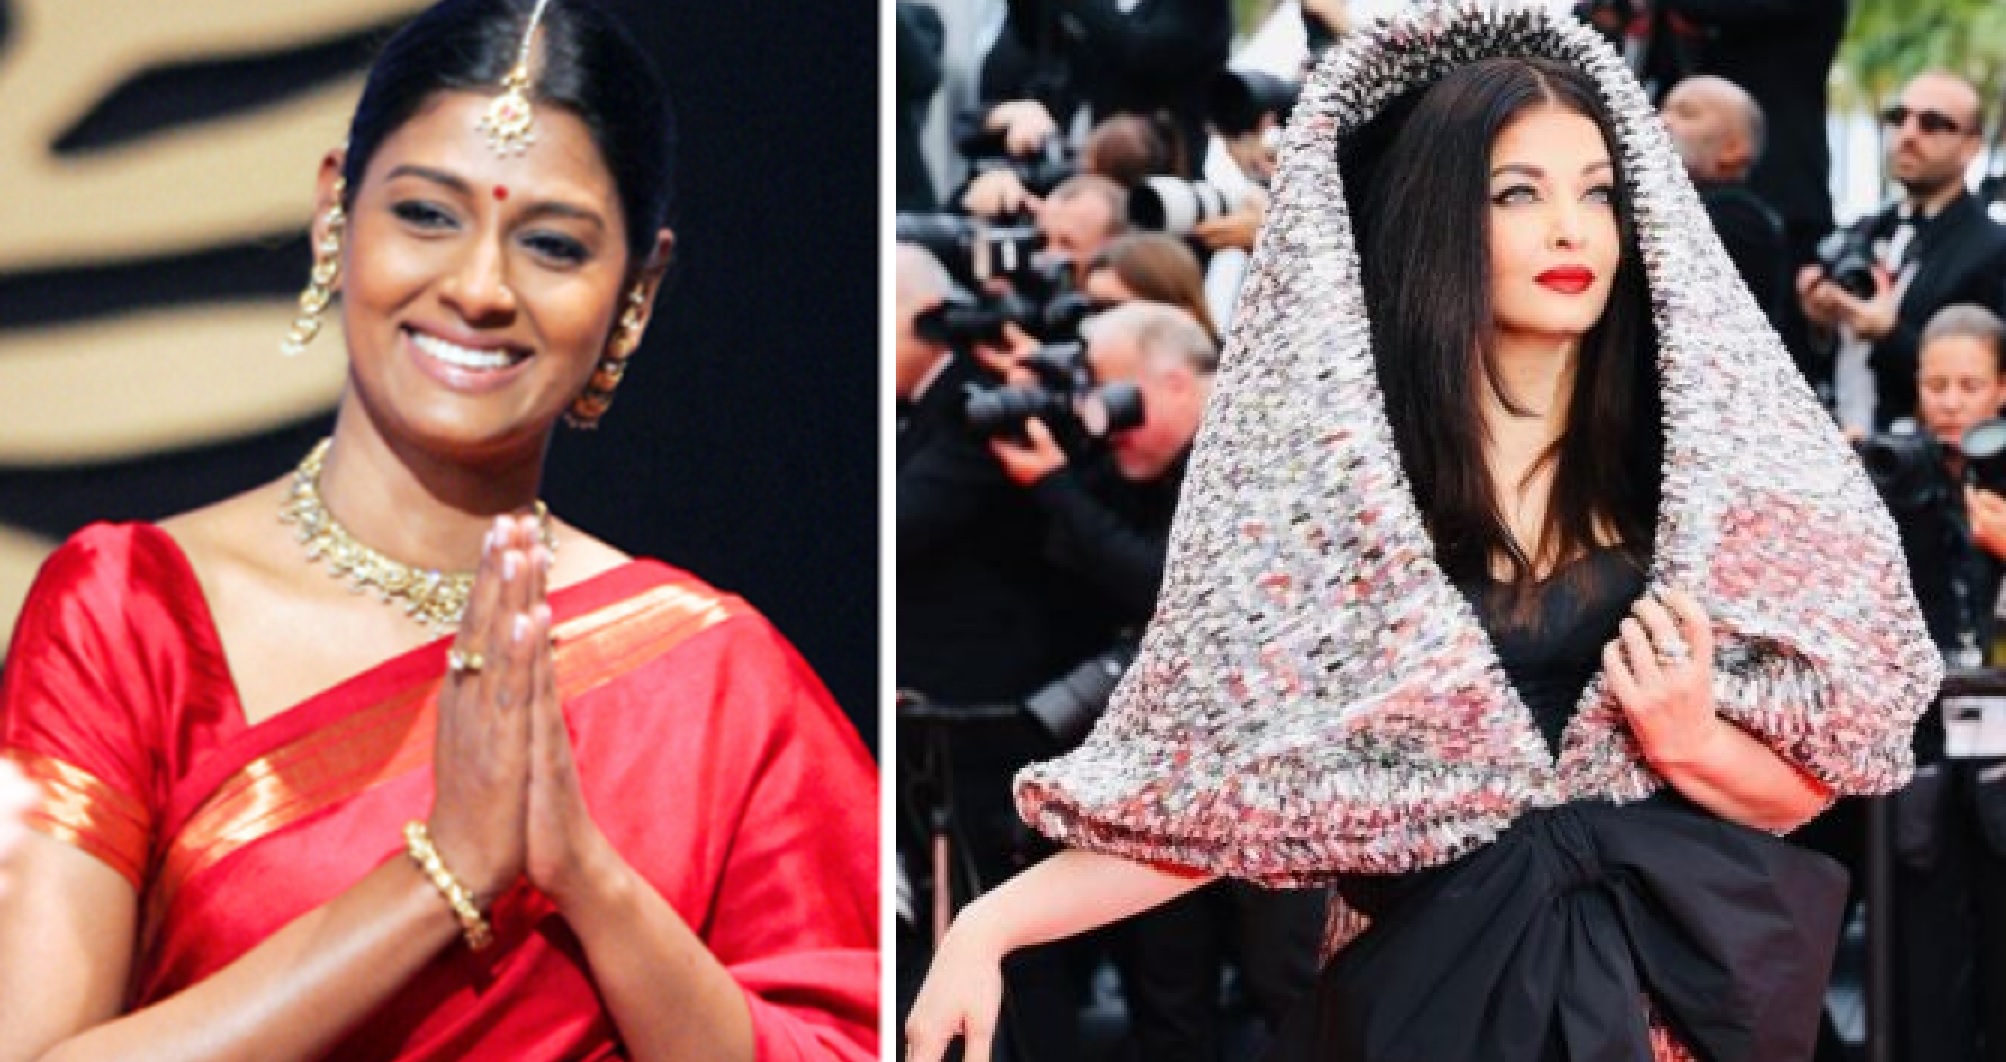 “It’s A Festival Of Films, Not Clothes” – Nandita Das’ TIGHT SLAP To Bollywood Celebs Over Cannes Glam Appearances